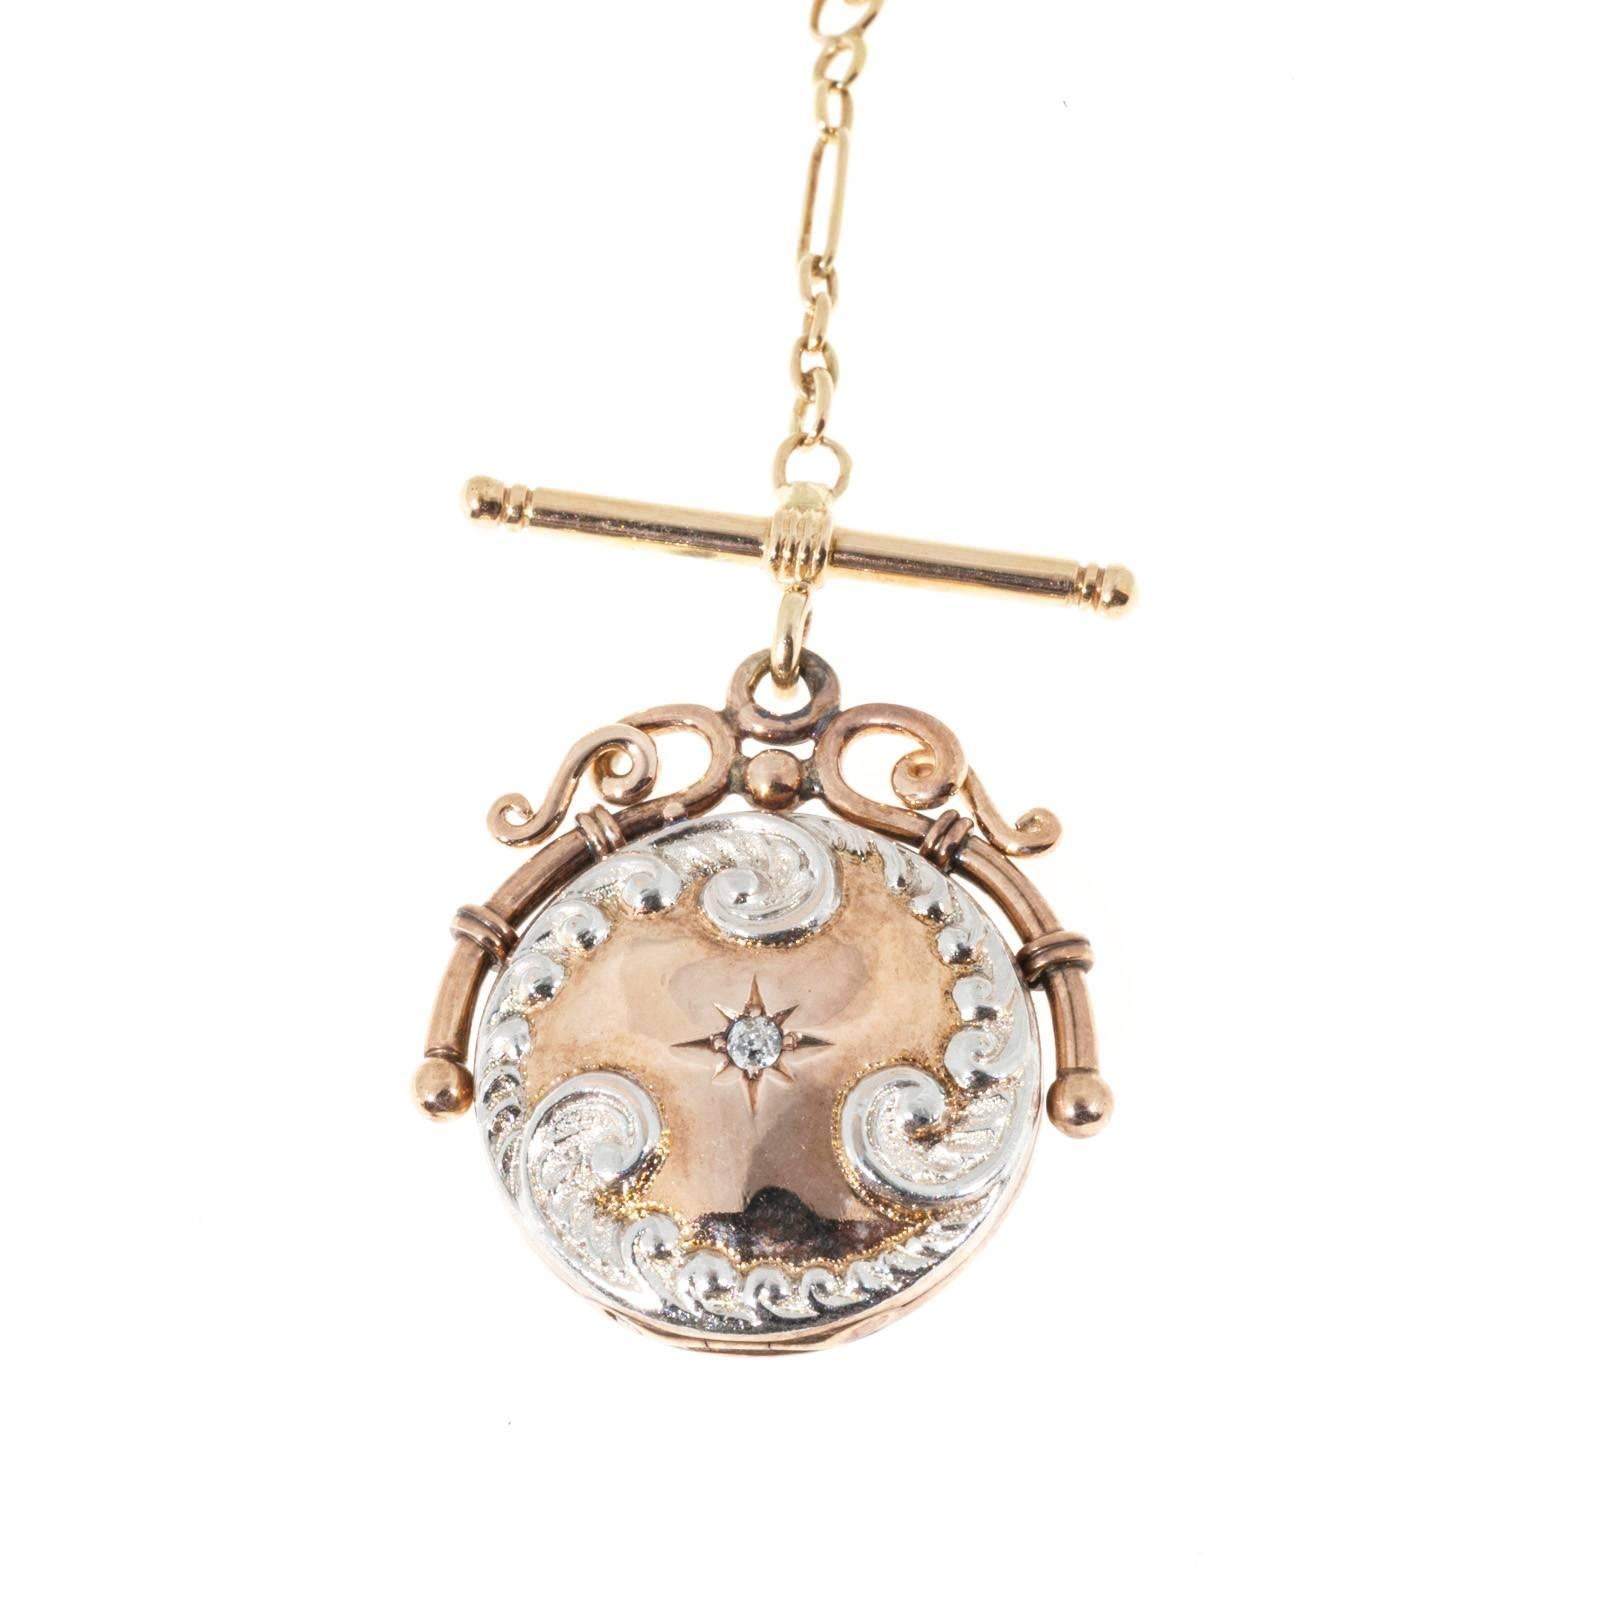 1890’s toggle style rose gold necklace. Handmade pink gold locket with Platinum topped scroll work and an old mine diamond. 

1 round diamond approx. total weight .03cts
14k Rose Gold
Stamped 14k
15.7 grams
Chain: 16 inches
Locket: 1 1/8 x 1